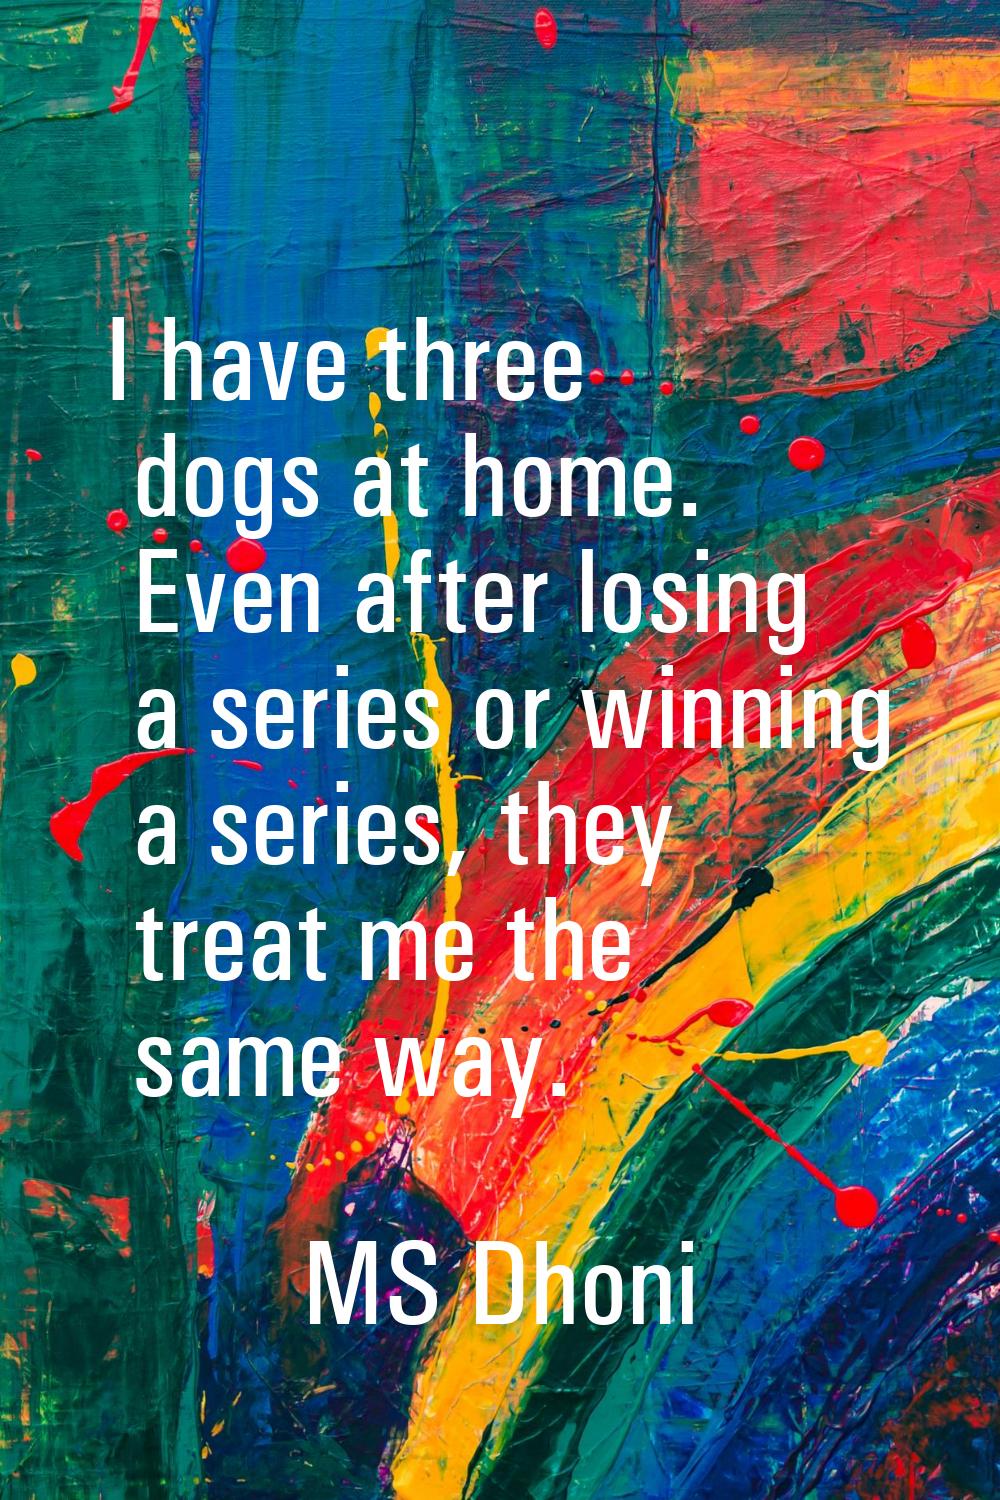 I have three dogs at home. Even after losing a series or winning a series, they treat me the same w